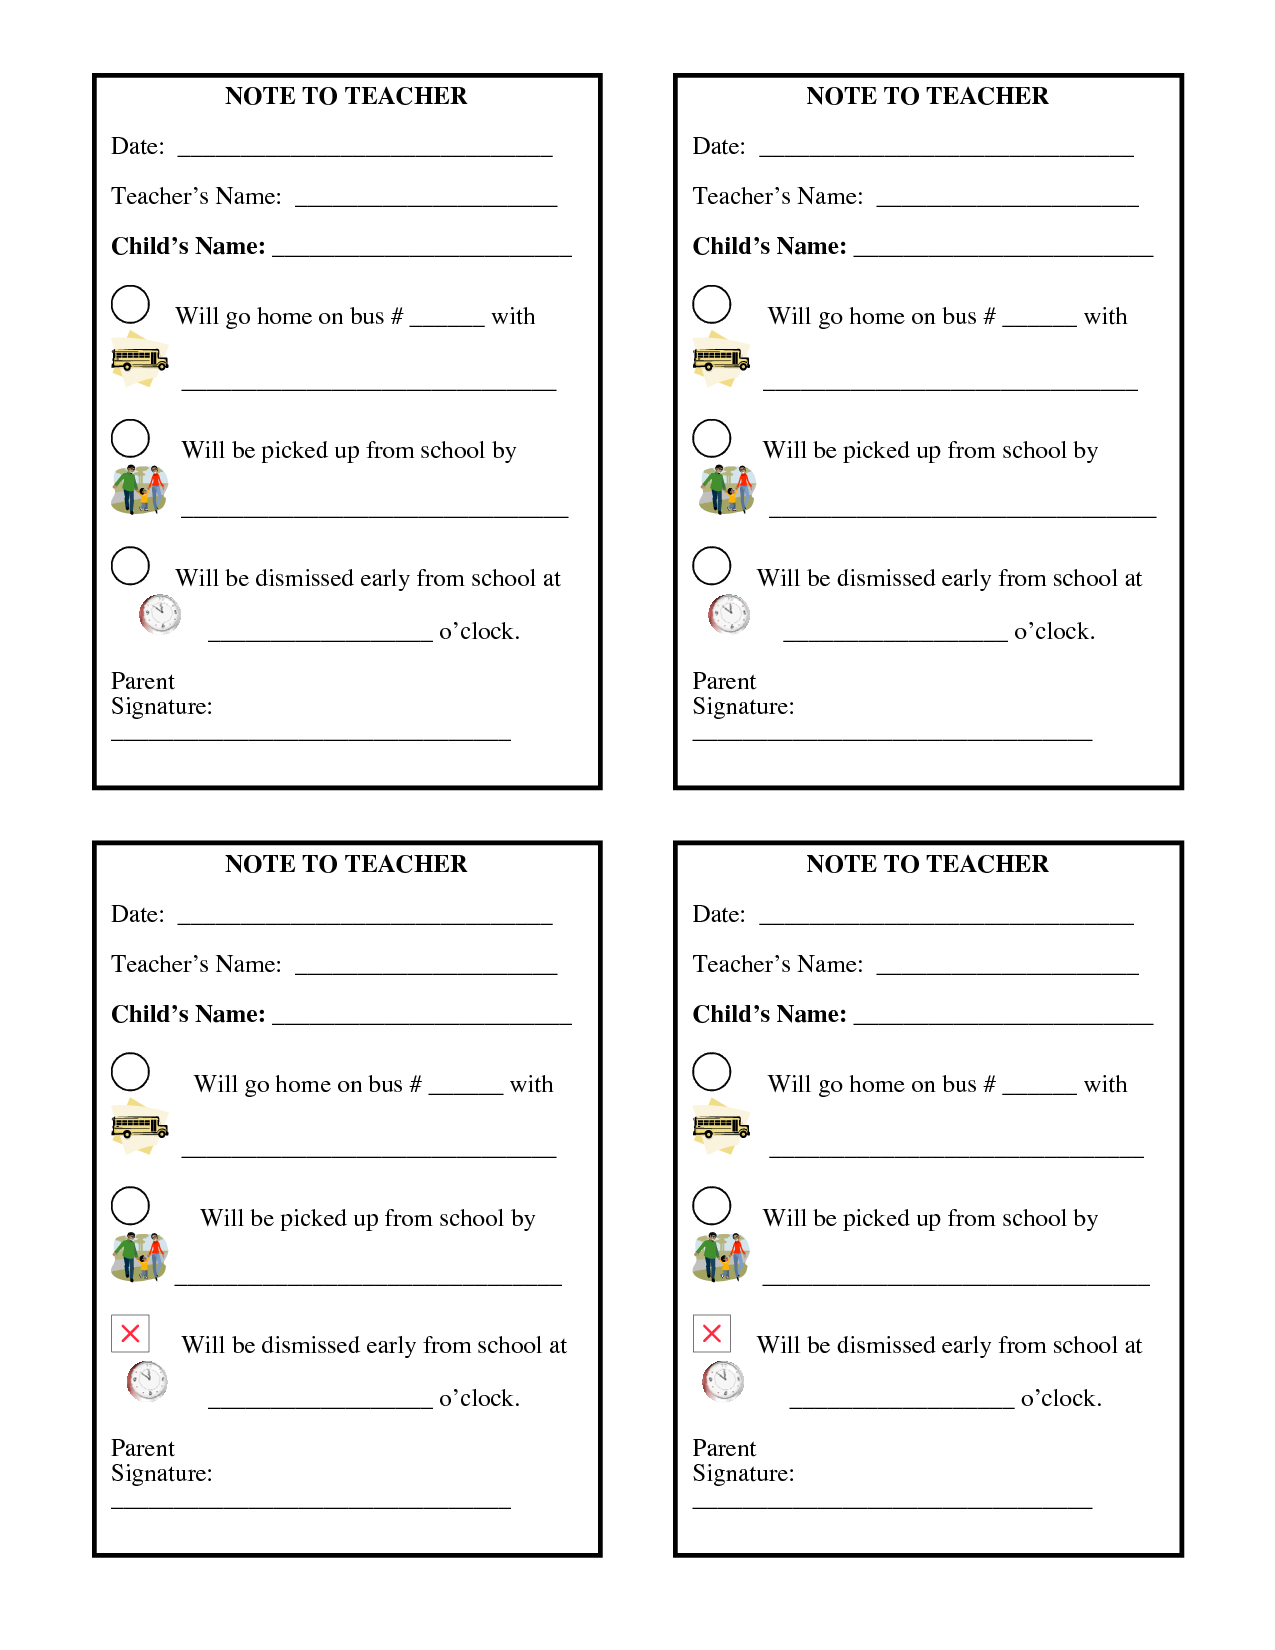 6-best-images-of-printable-note-from-teacher-template-free-printable-school-notes-printable